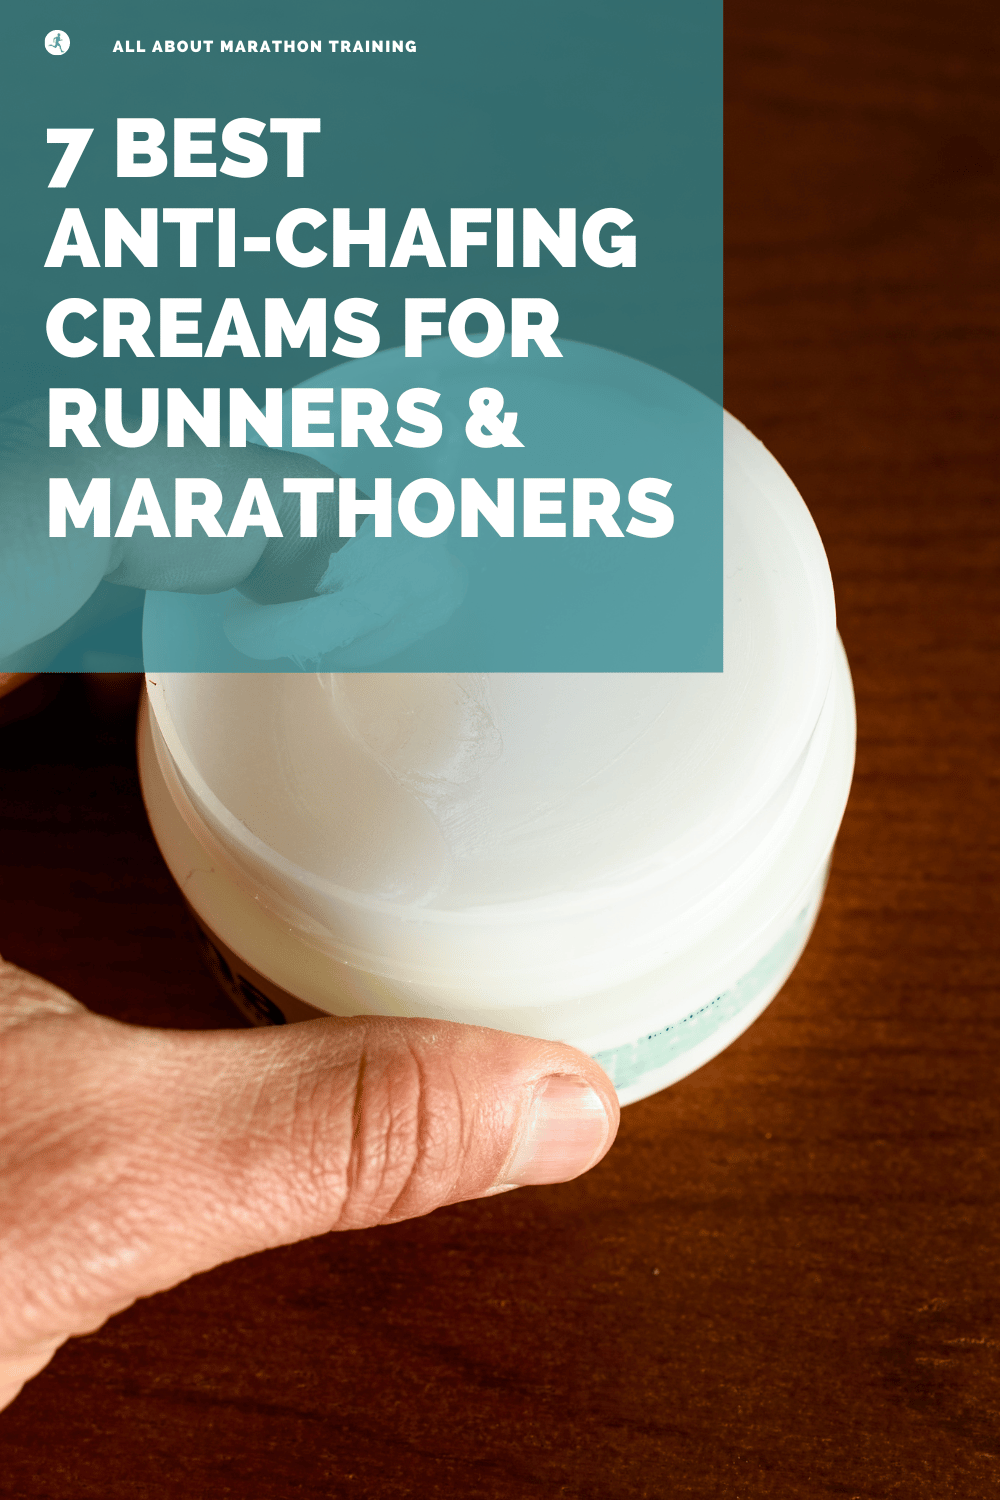 https://www.all-about-marathon-training.com/images/xAntiChafingCreamsforRunnersPIN.png.pagespeed.ic.F2Fp1_aMvz.png